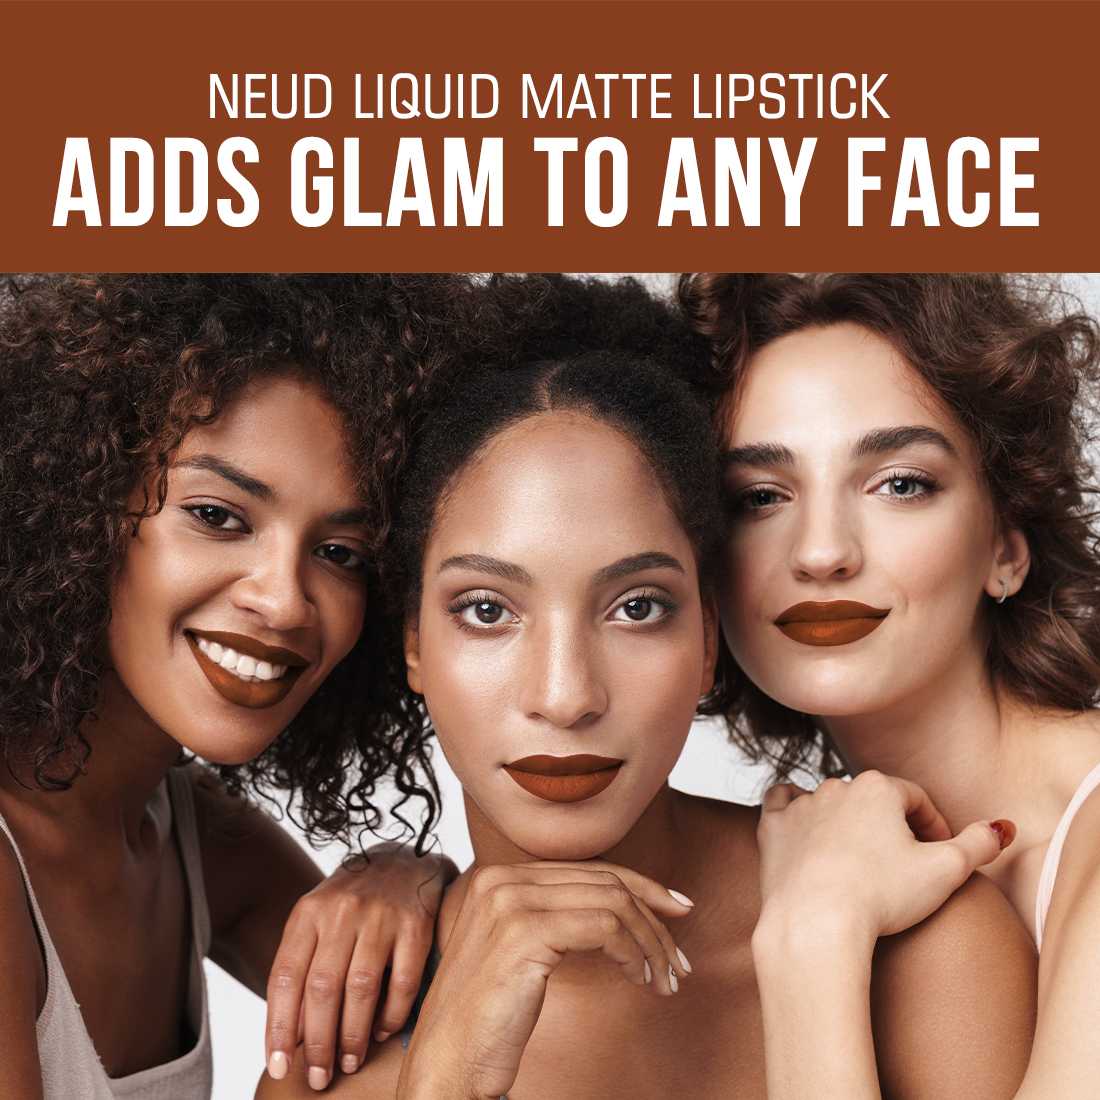 NEUD Matte Liquid Lipstick Oh My Coco with Jojoba Oil, Vitamin E and Almond Oil - Smudge Proof 12-hour Stay Formula with Free Lip Gloss